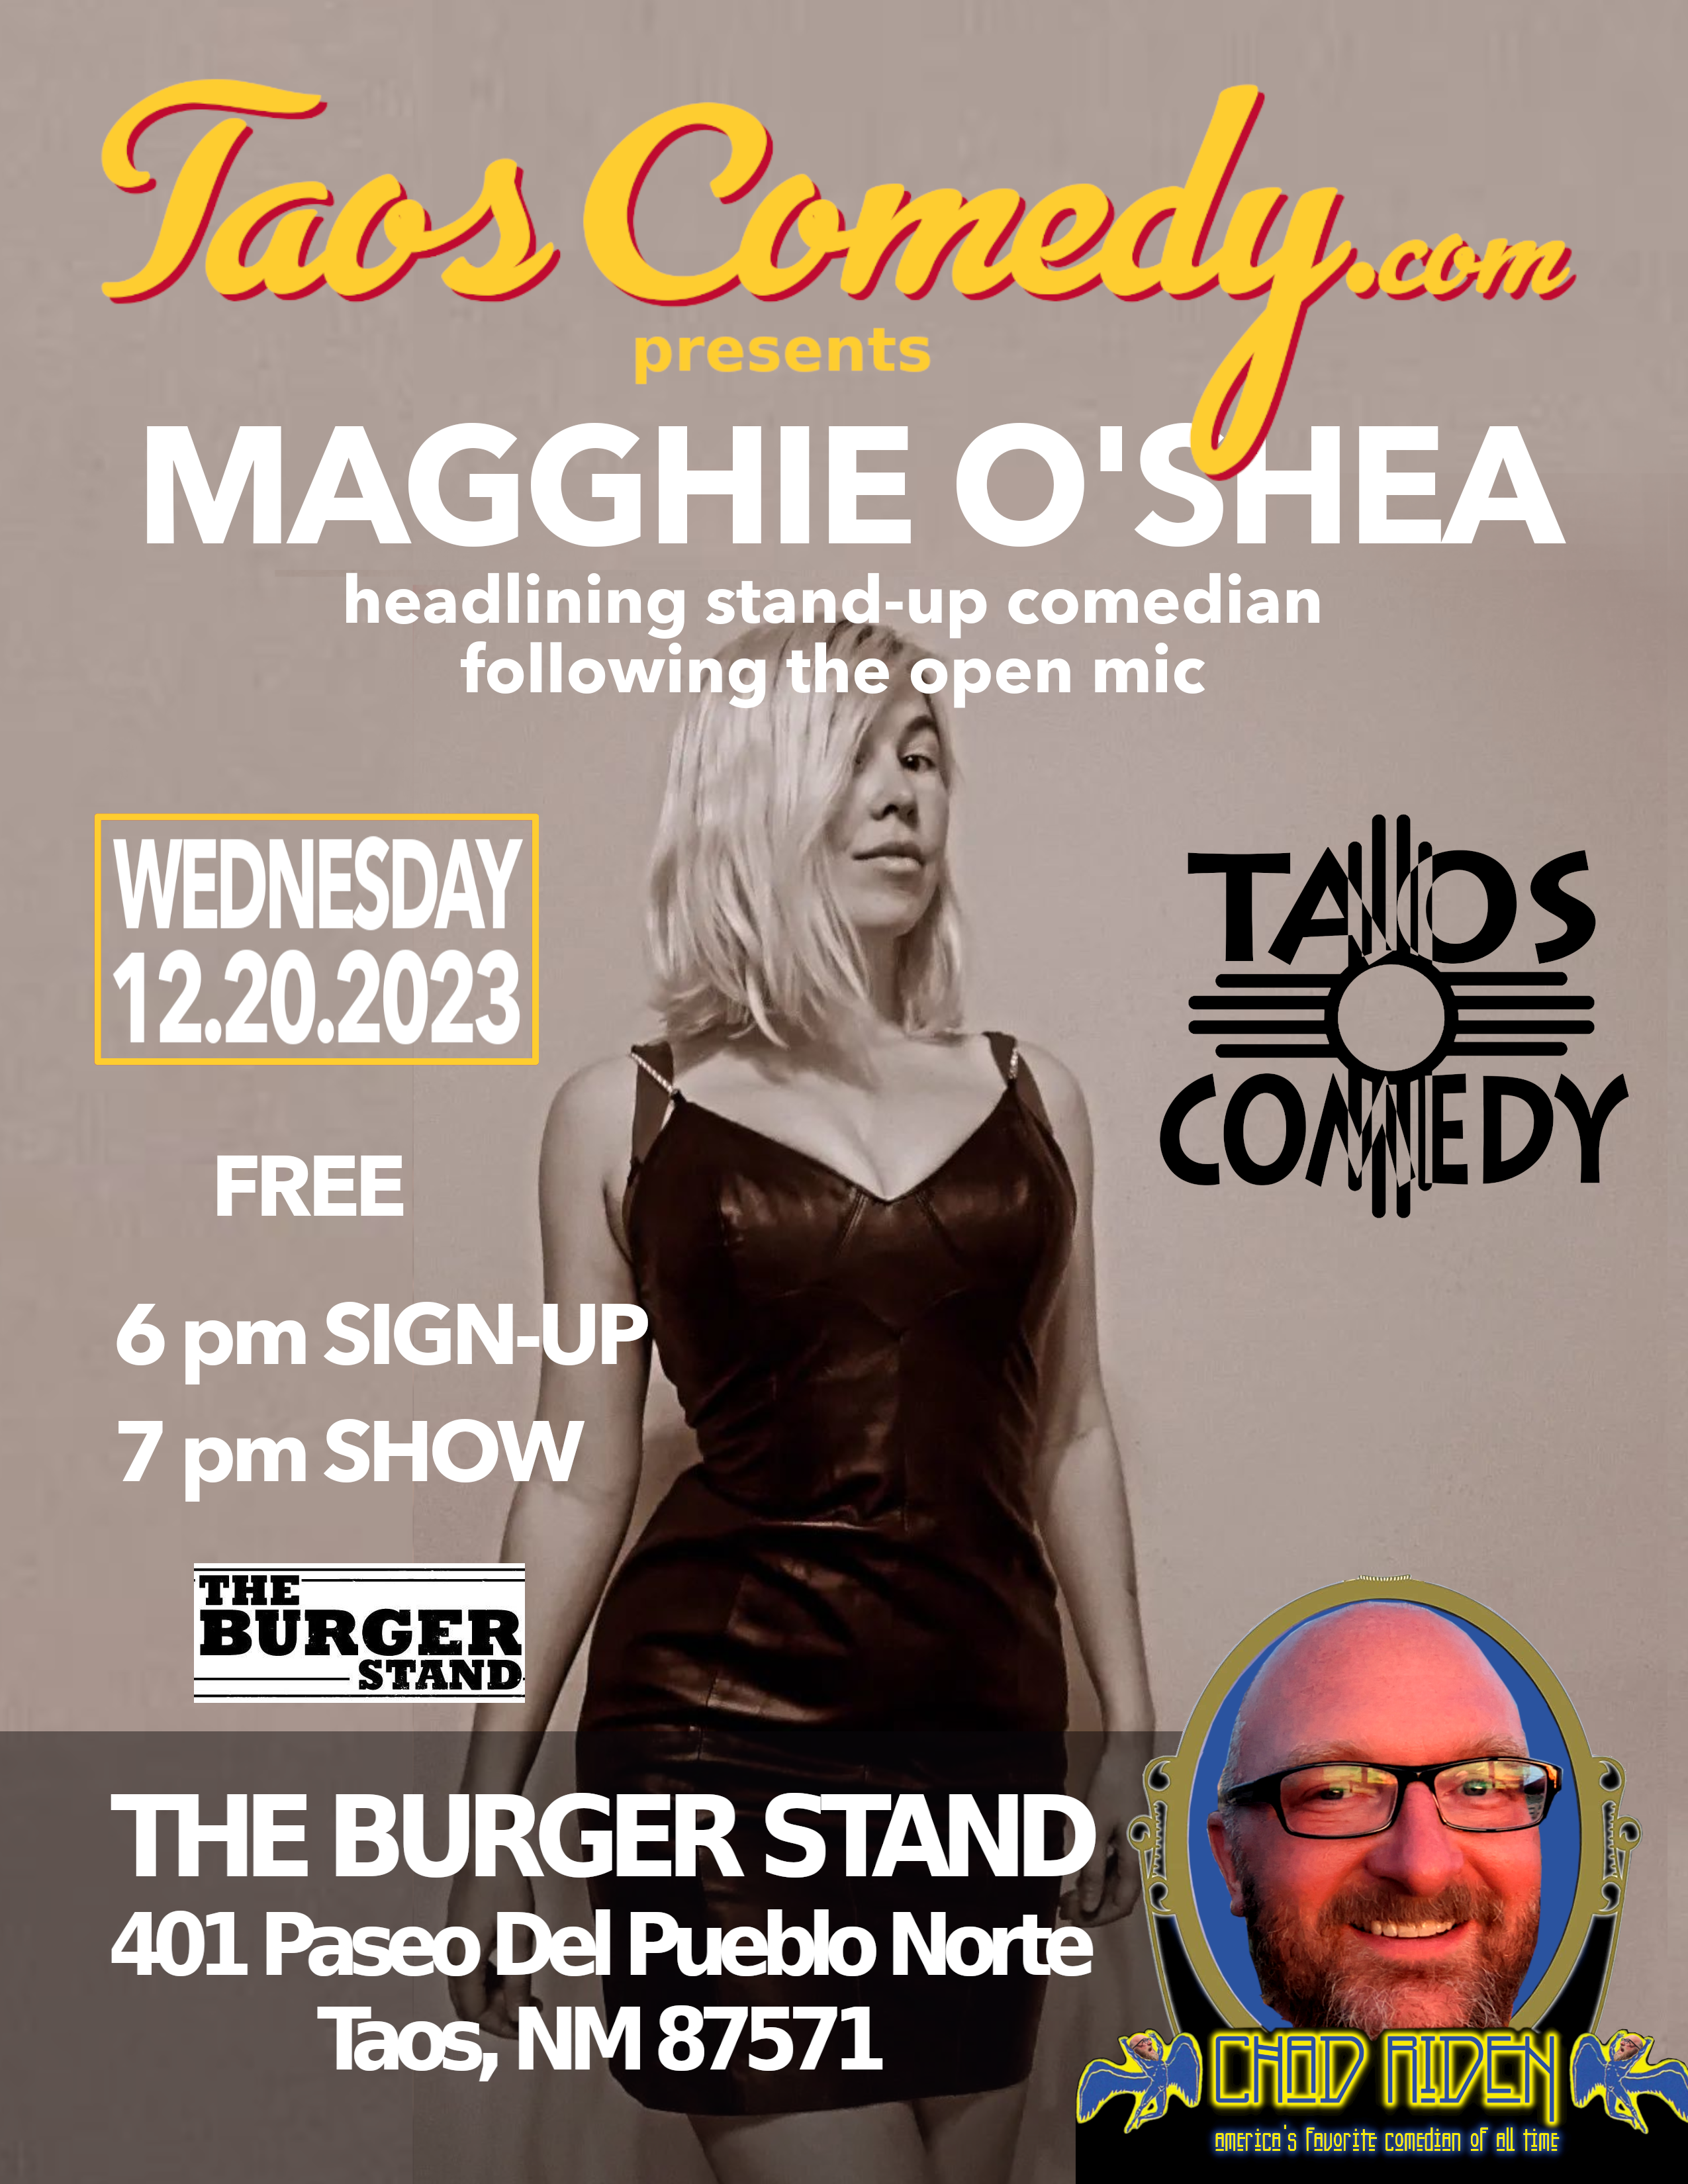 Magghie O’Shea headlines The Burger Stand 12/20/2023 following the open mic